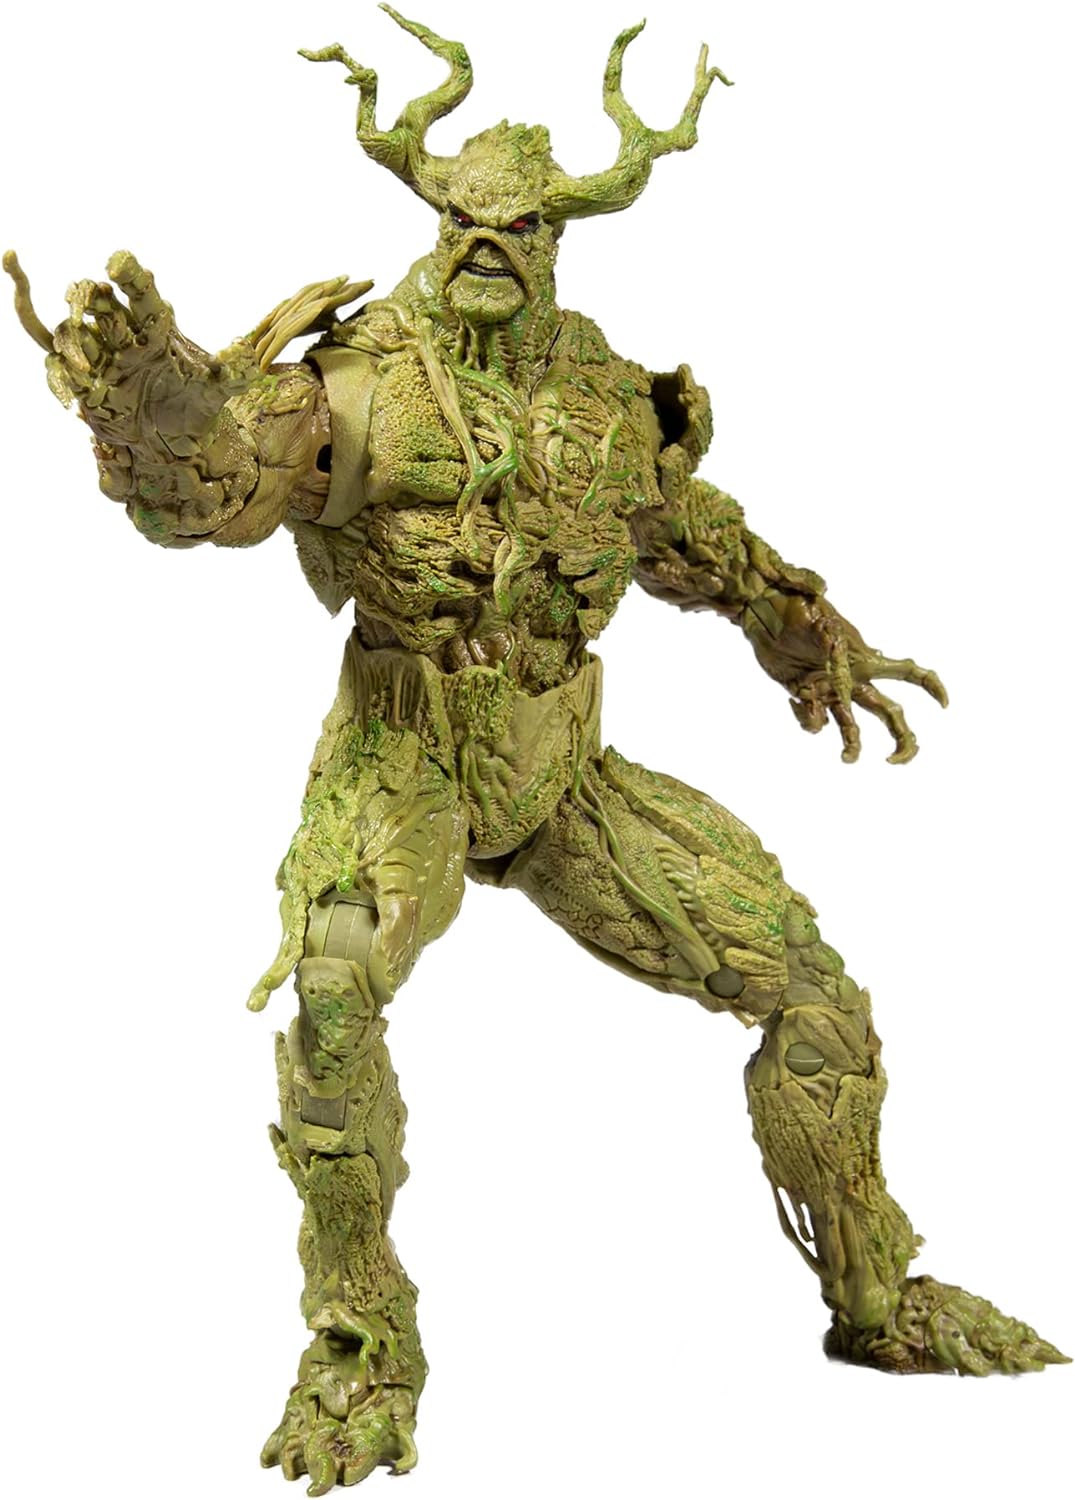 DC Multiverse: Megafig Action Figure: Swamp Thing (Variant Edition)